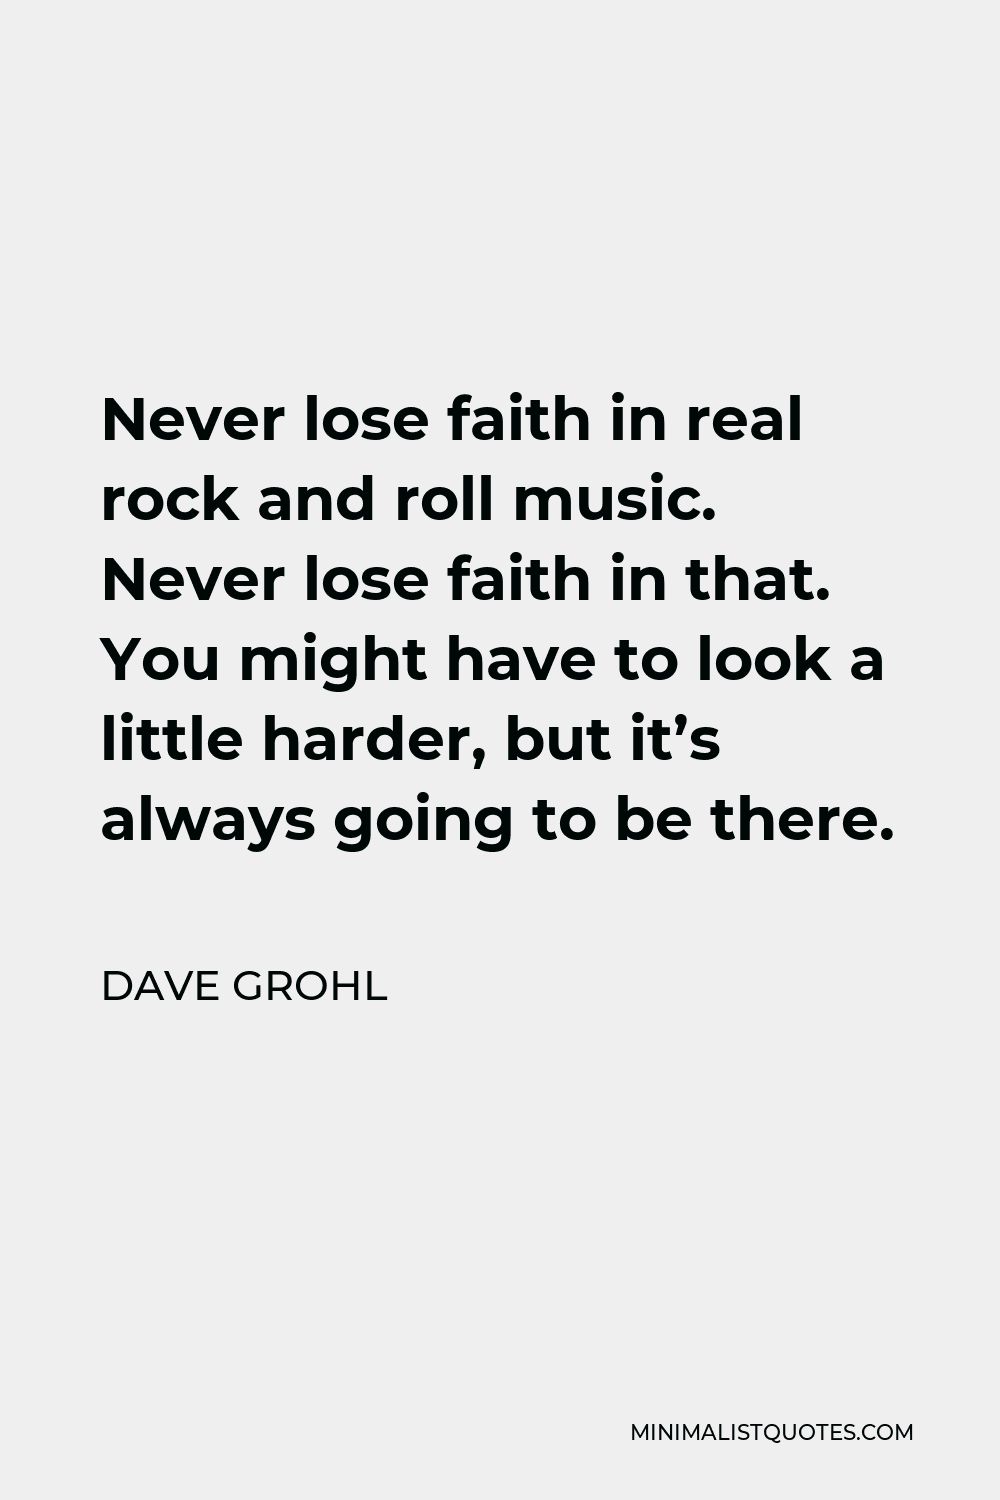 Dave Grohl Quote - Never lose faith in real rock and roll music. Never lose faith in that. You might have to look a little harder, but it’s always going to be there.